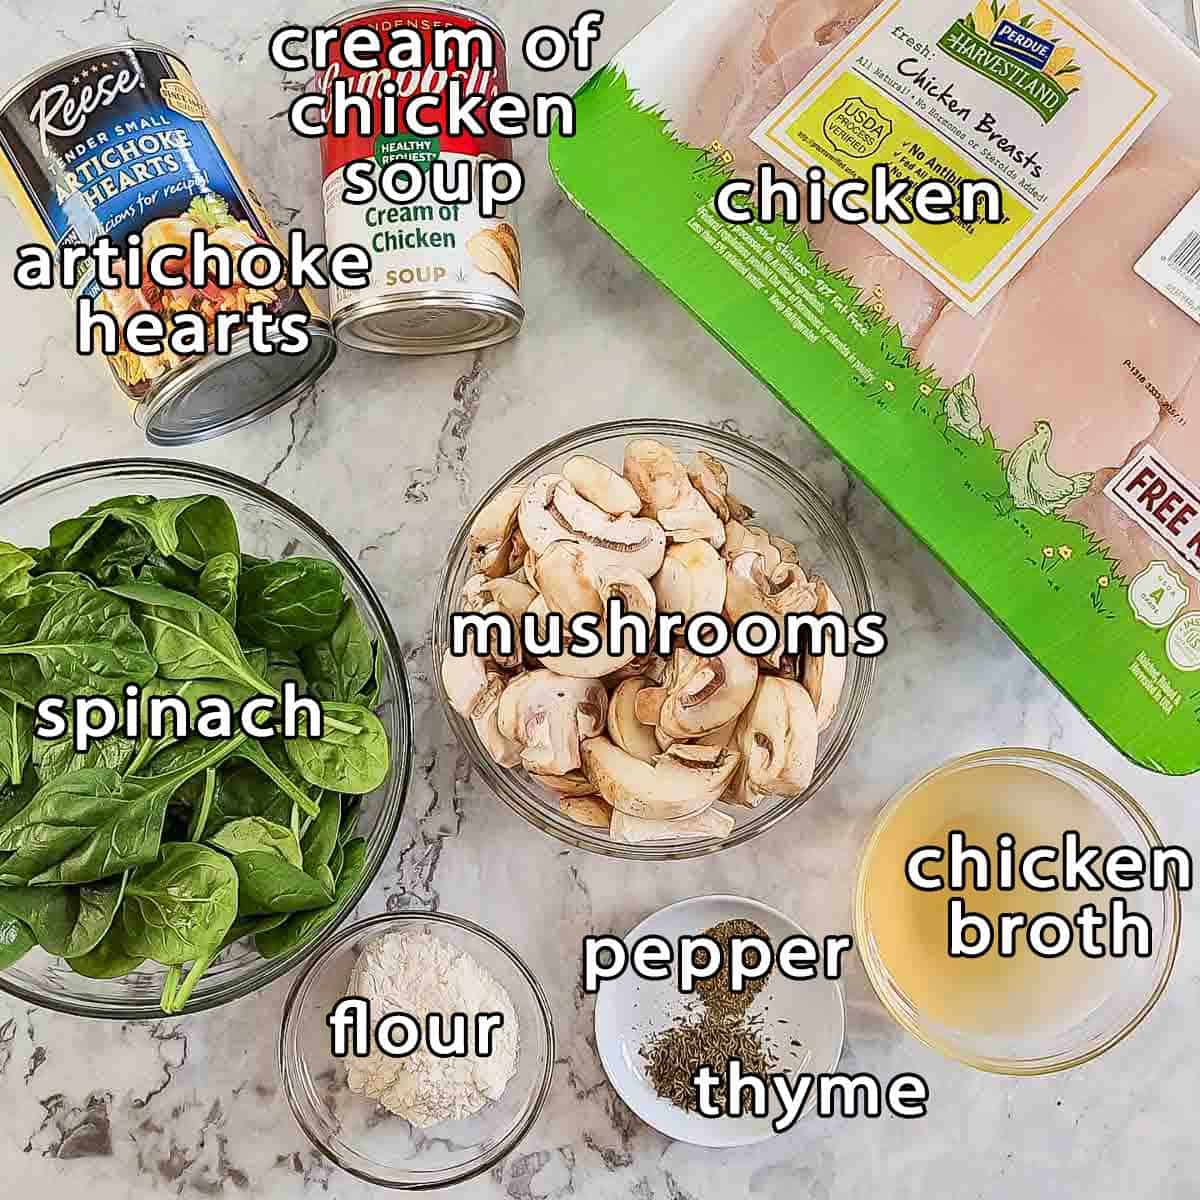 Overhead shot of ingredients - artichoke hearts, cream of chicken soup, chicken, spinach, mushrooms, chicken broth, flour, pepper, and thyme.